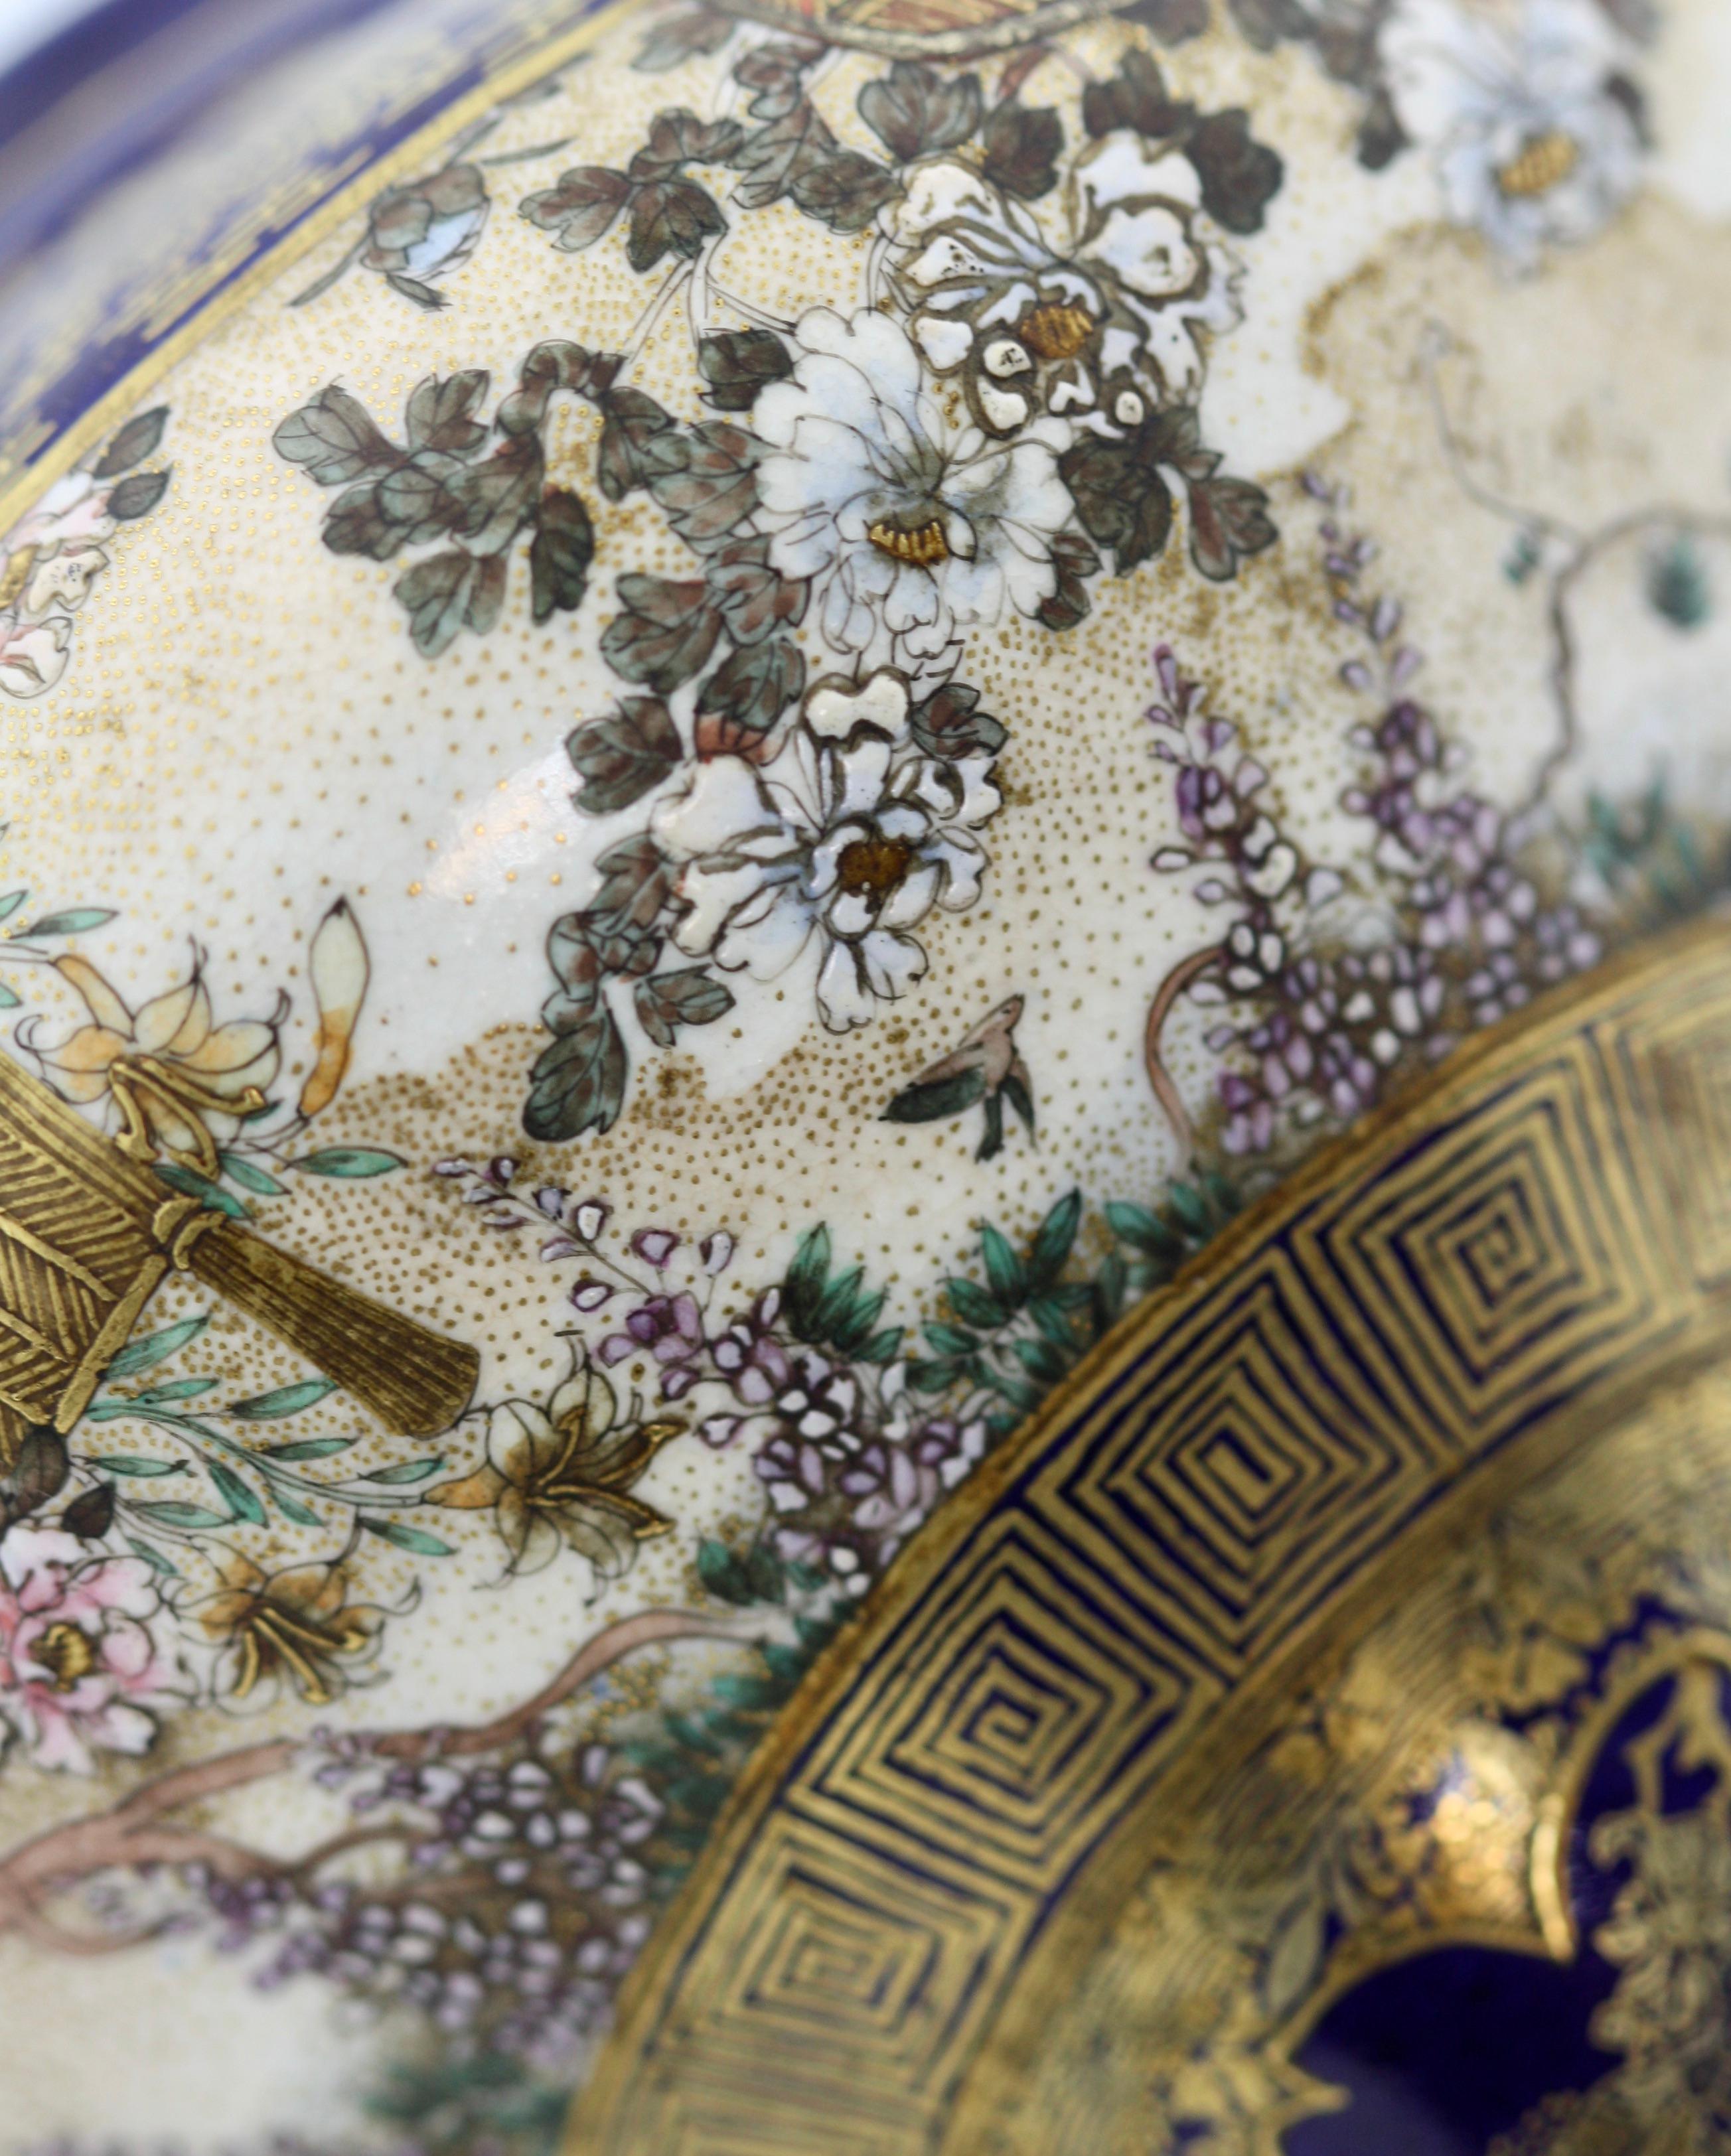 A Satsuma Earthenware Vase,
by Kinkozan,
Japanese, Meiji period (1868-1912)
decorated in polychrome enamels and gilt over a clear, crackled glaze, delicately painted with ladies and men, the reverse with a flowering garden with sprays of flowers,